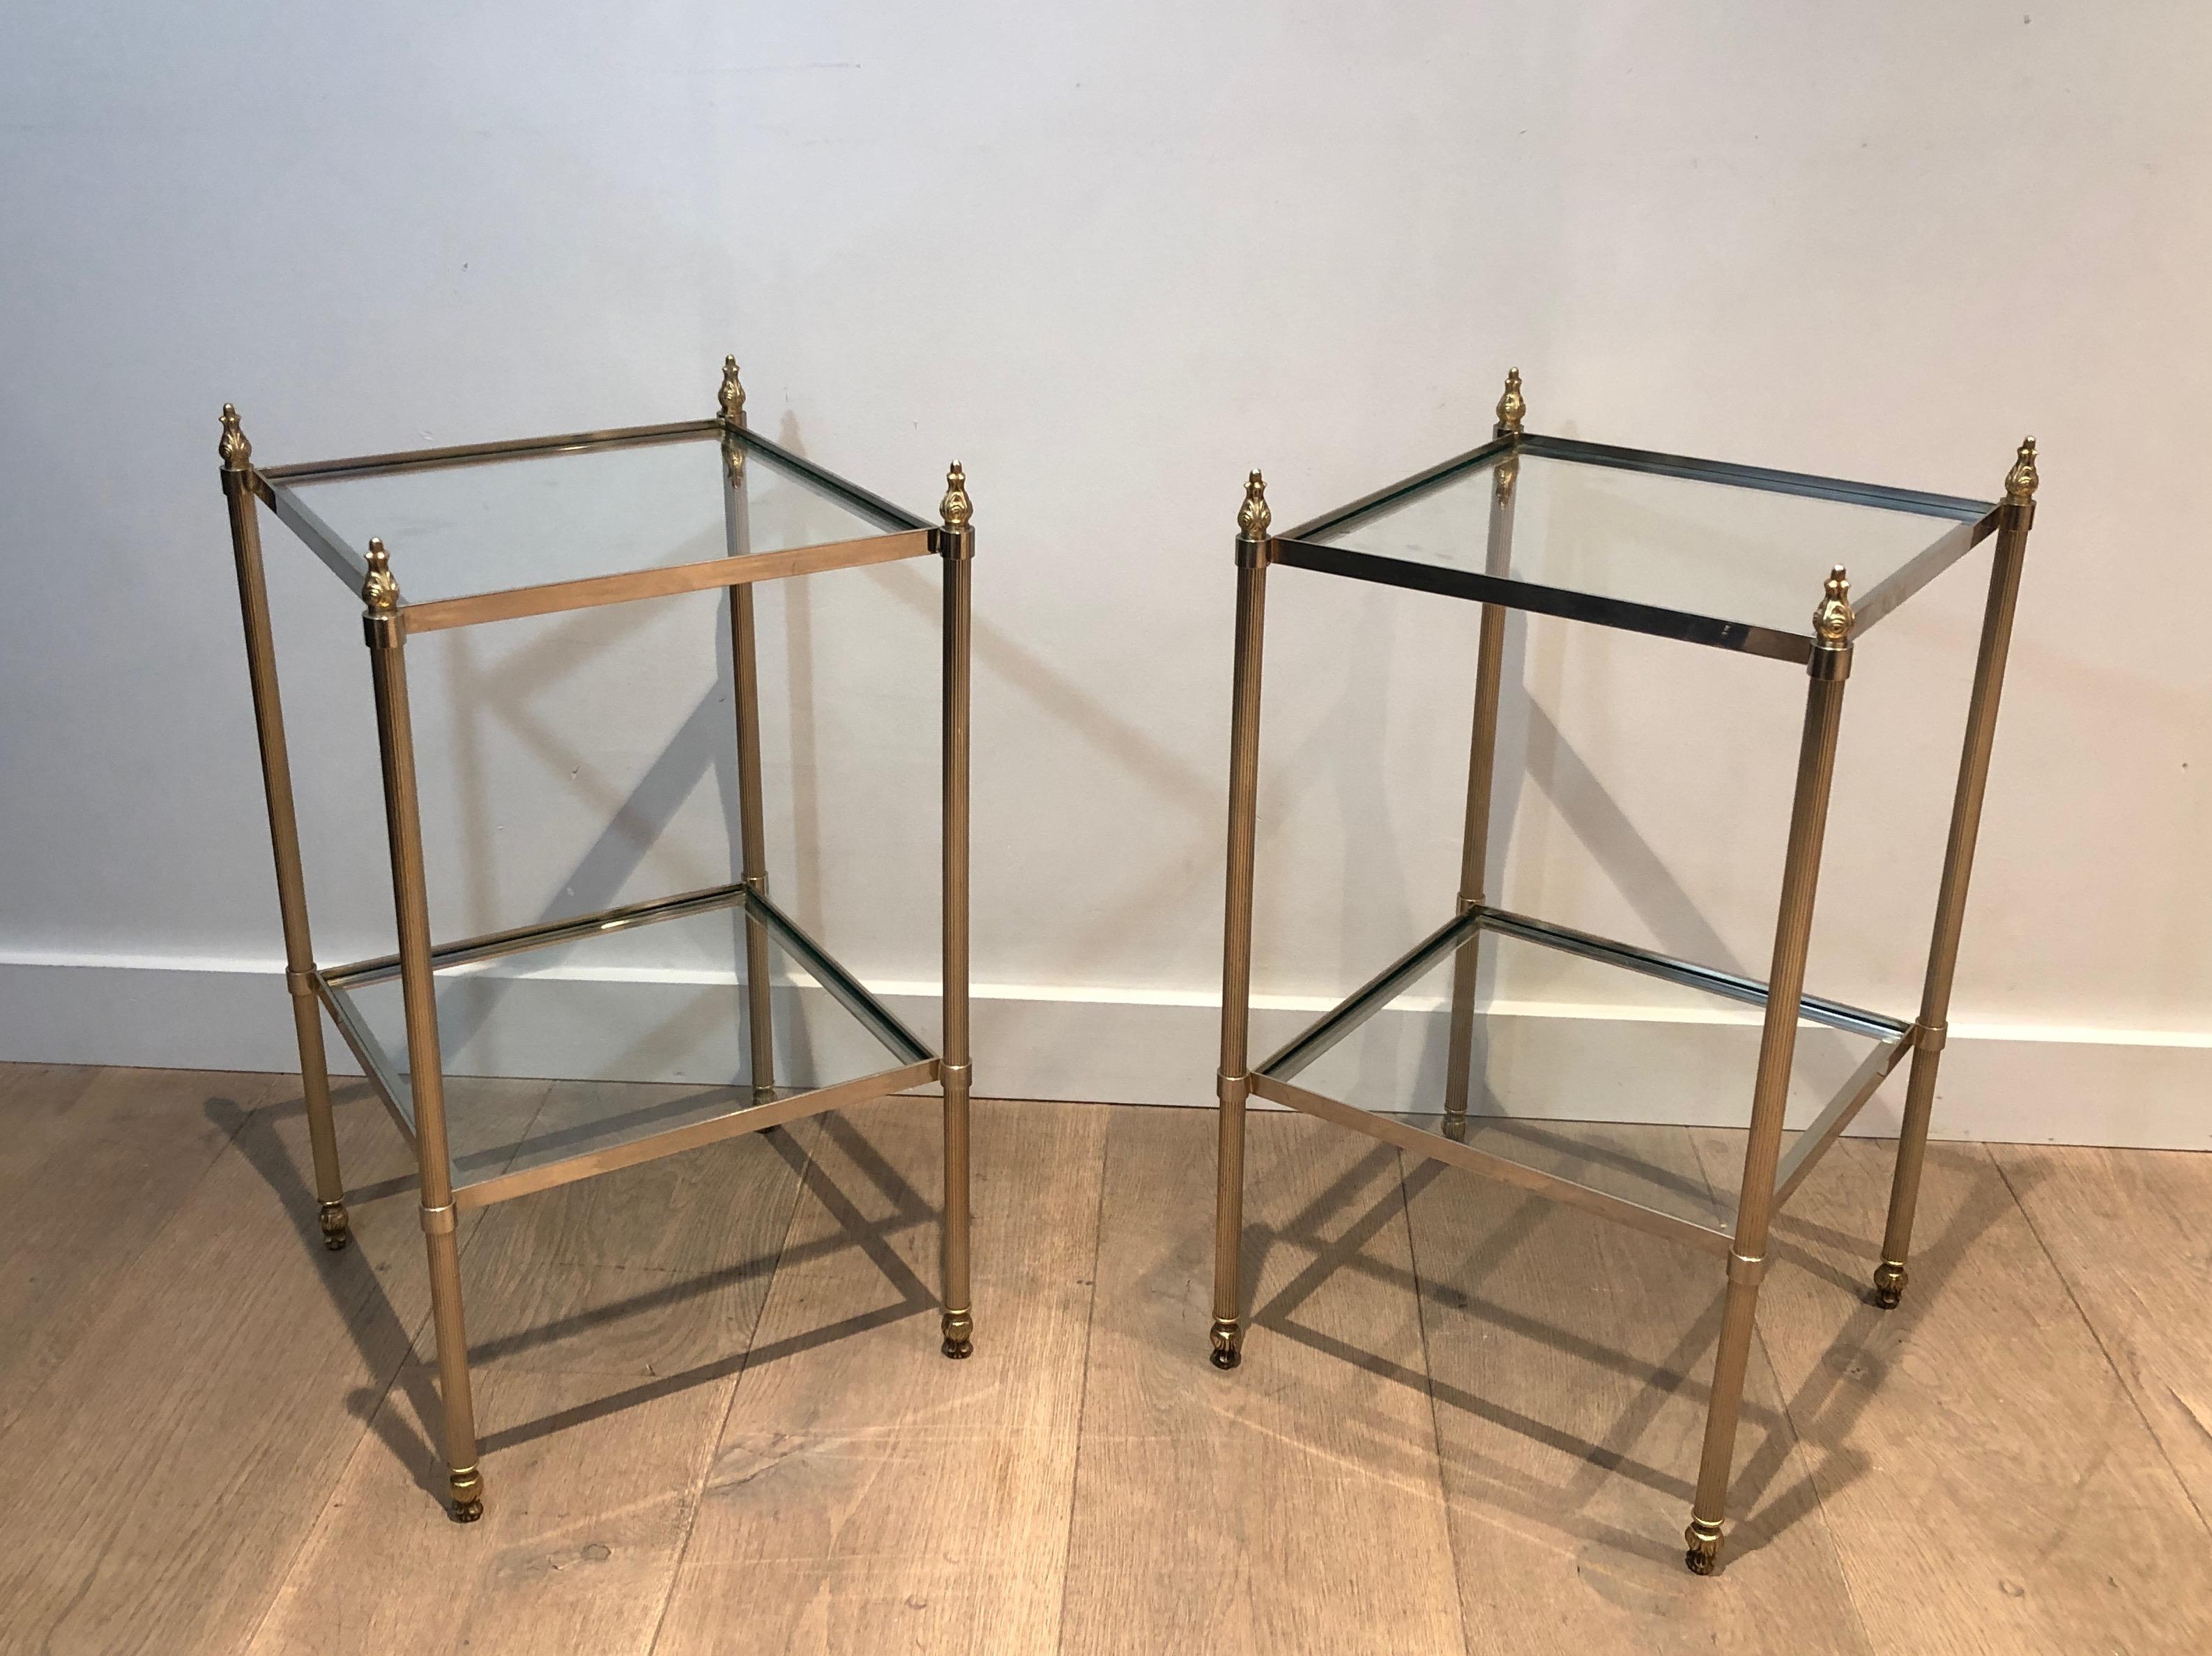 Neoclassical Pair of Silver Plated Side Tables with 2 Tiers and Fluted Legs, French Work Attr